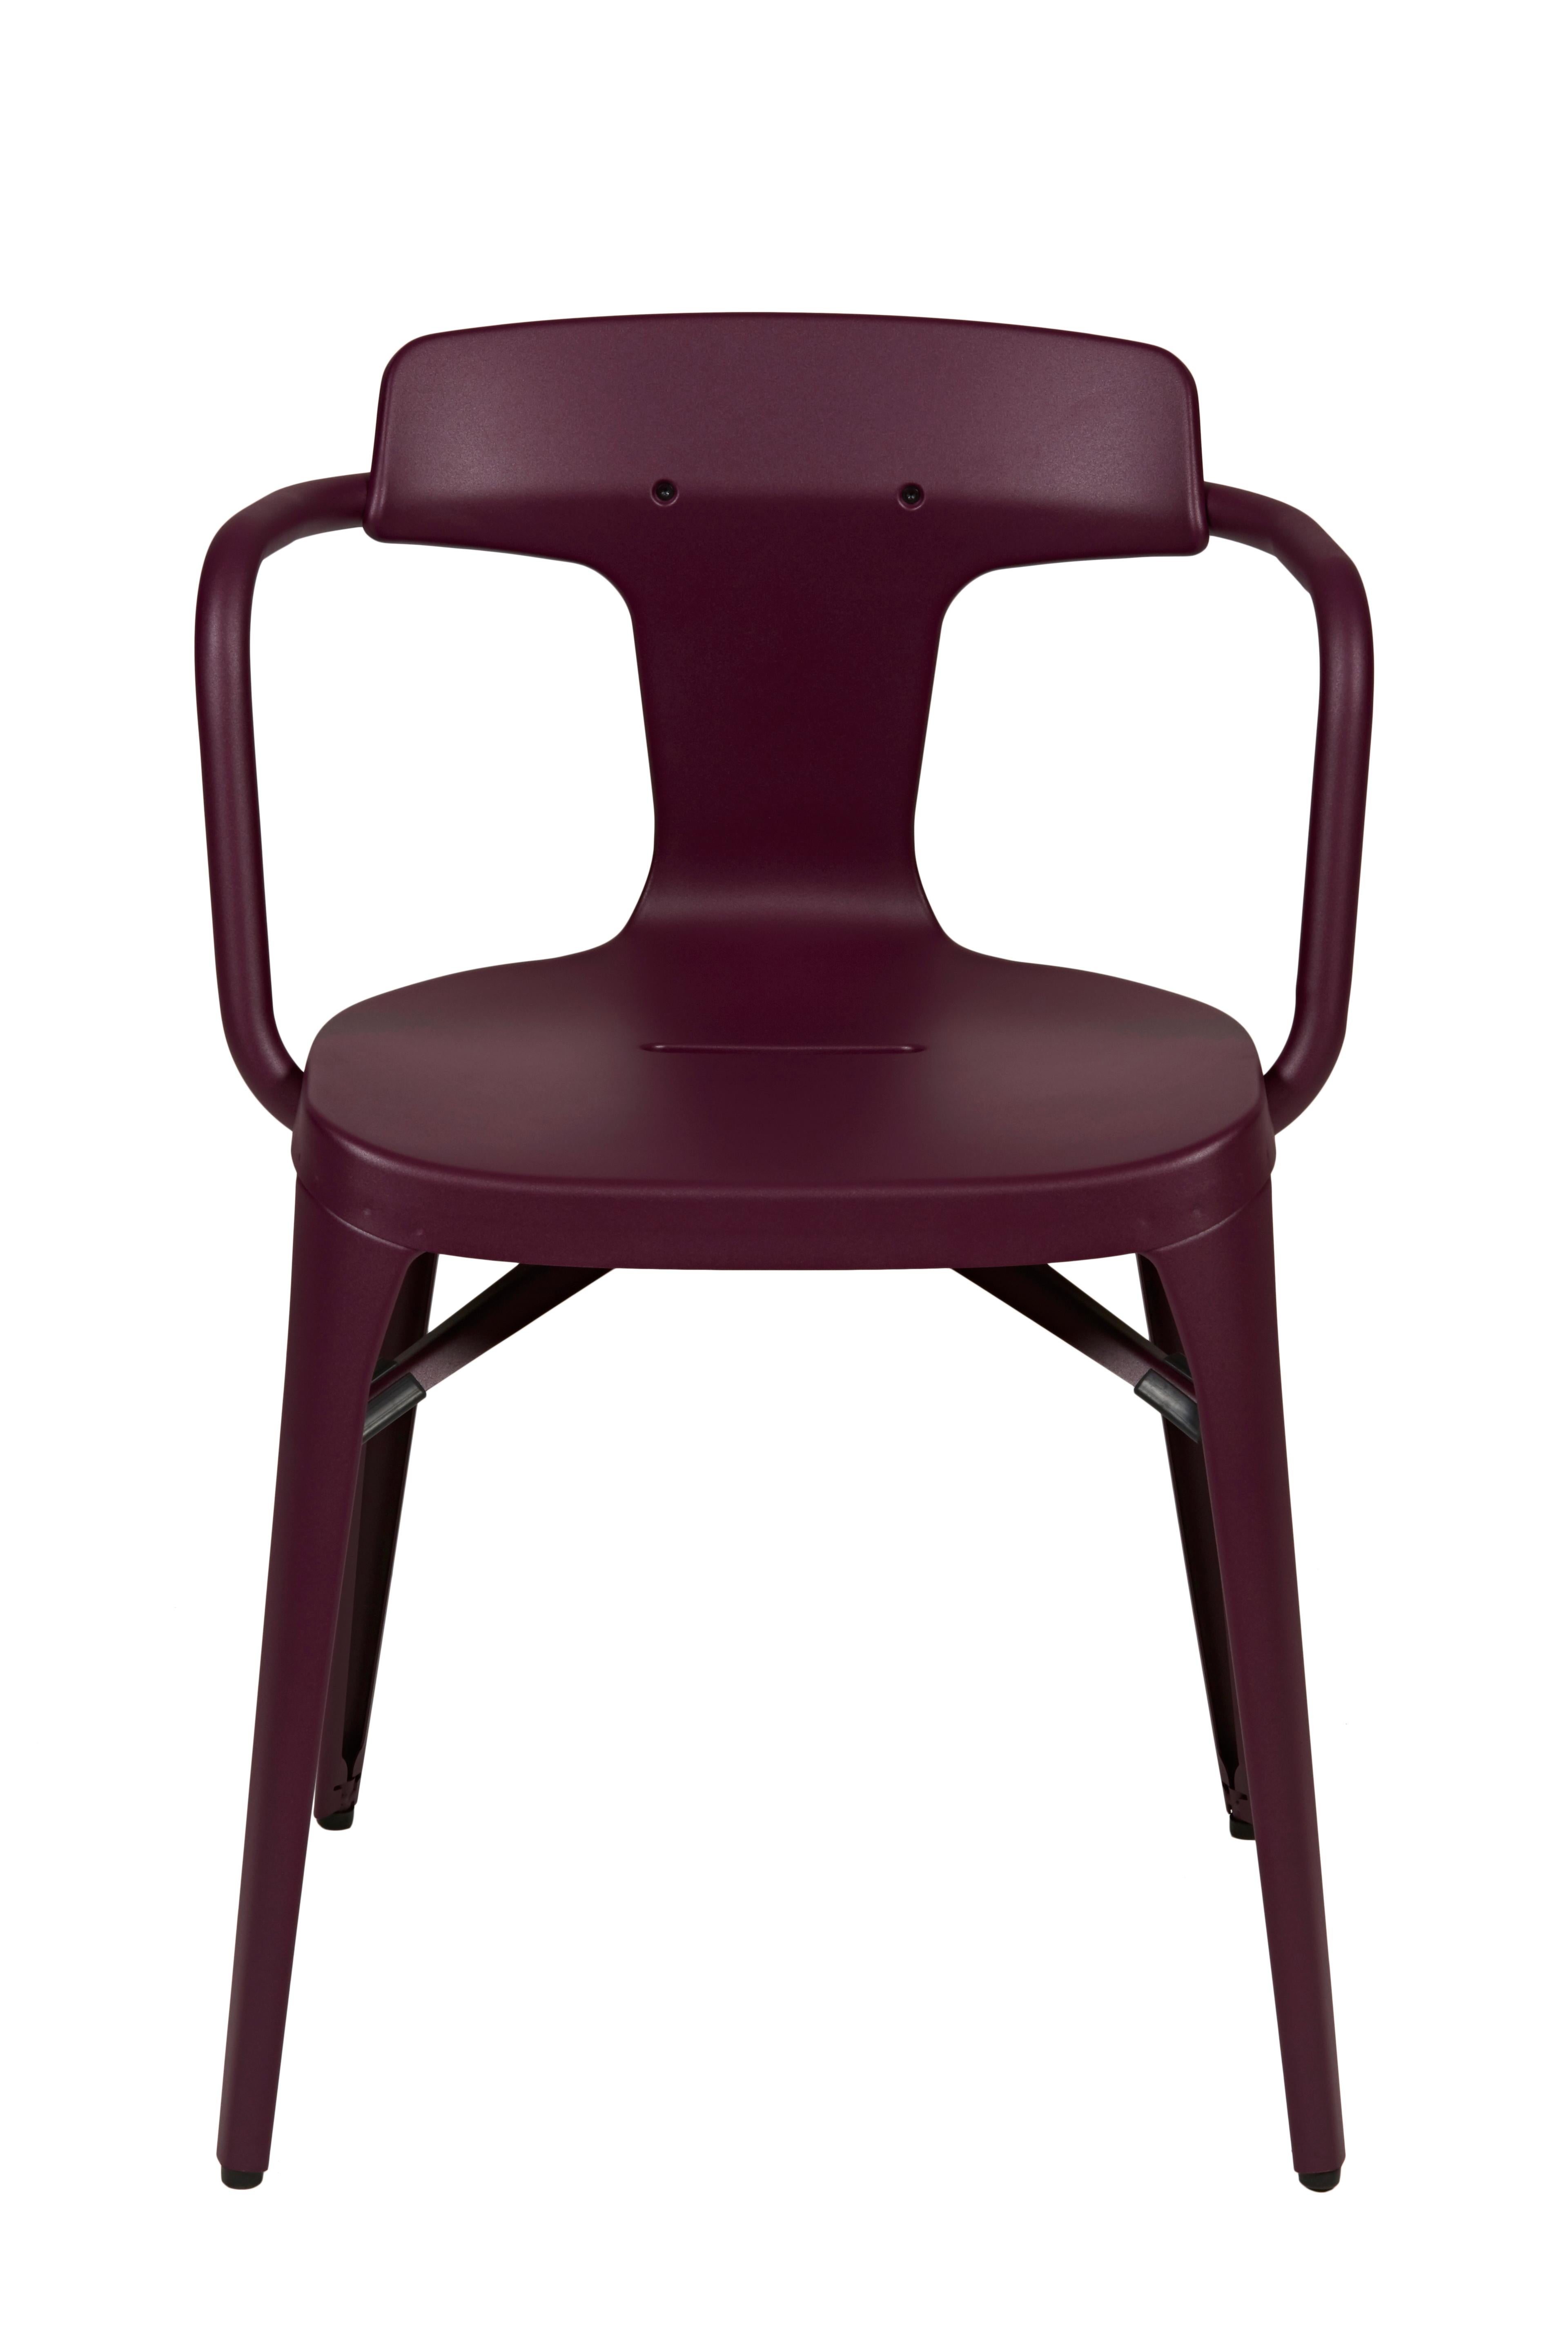 Im Angebot: T14 Chair in Pop Colors by Patrick Norguet and Tolix, Purple (Aubergine) 2